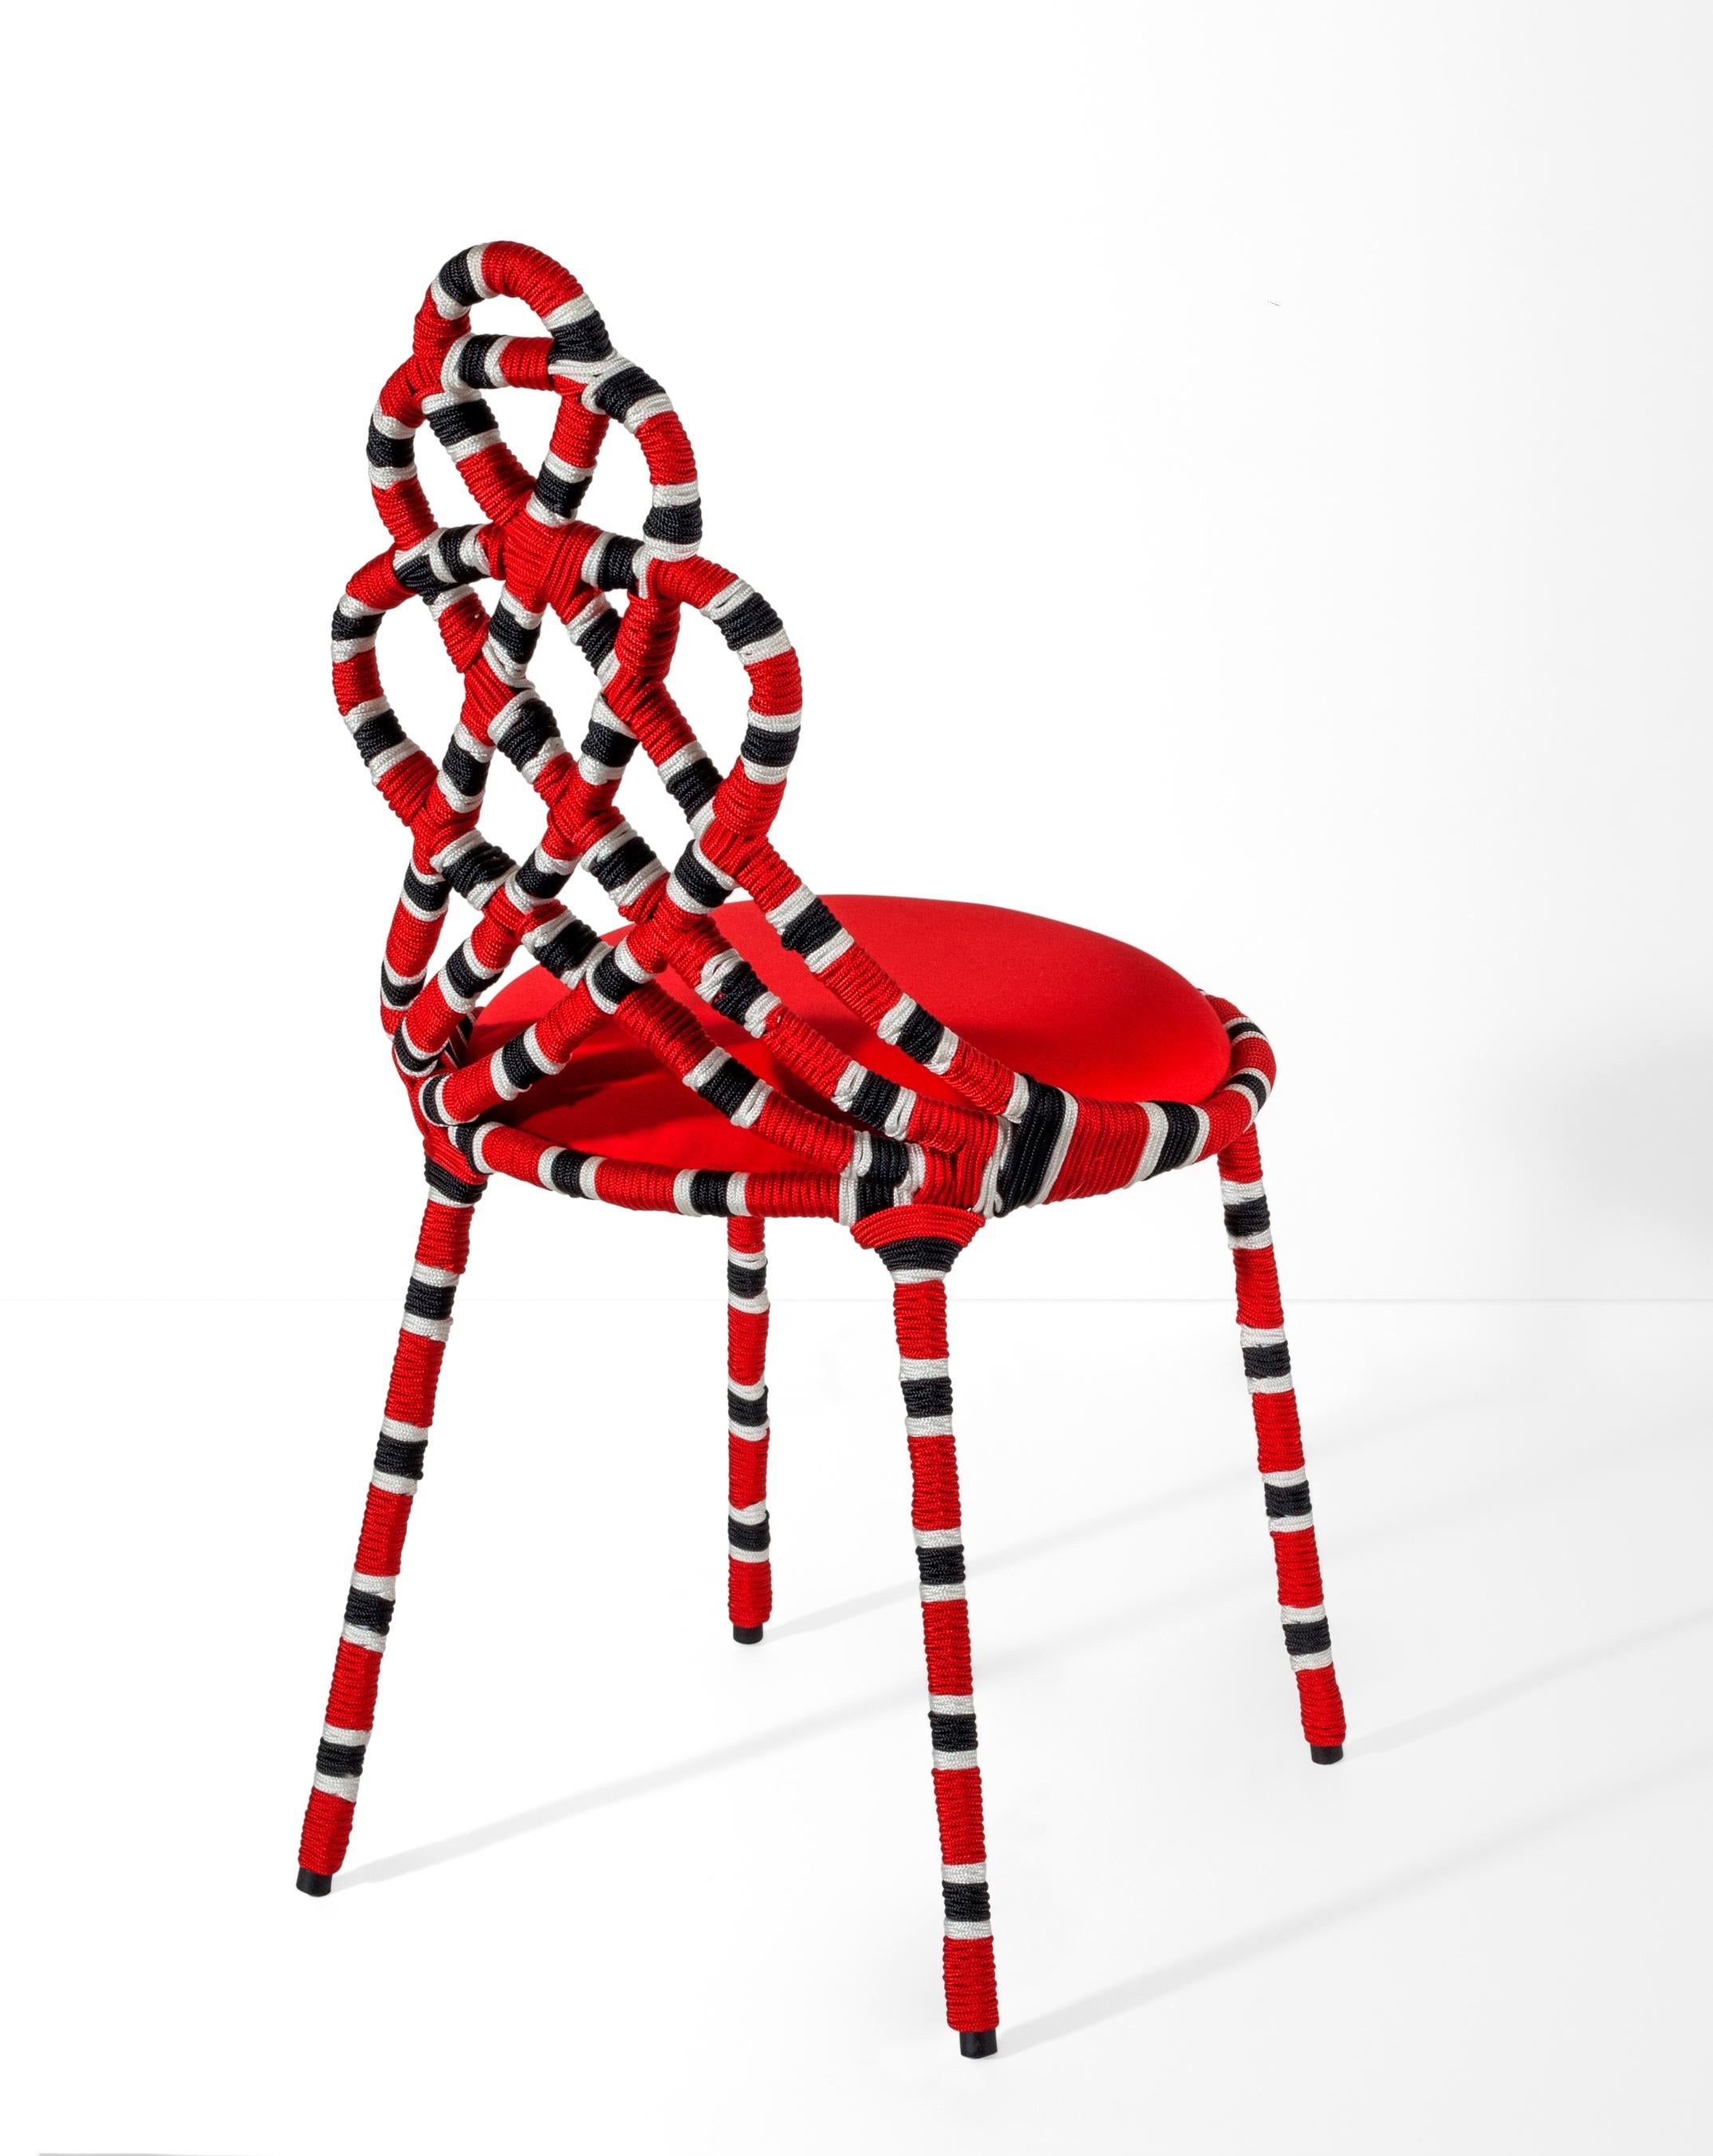 Stainless Steel Cobra Coral Chair, Available in NY